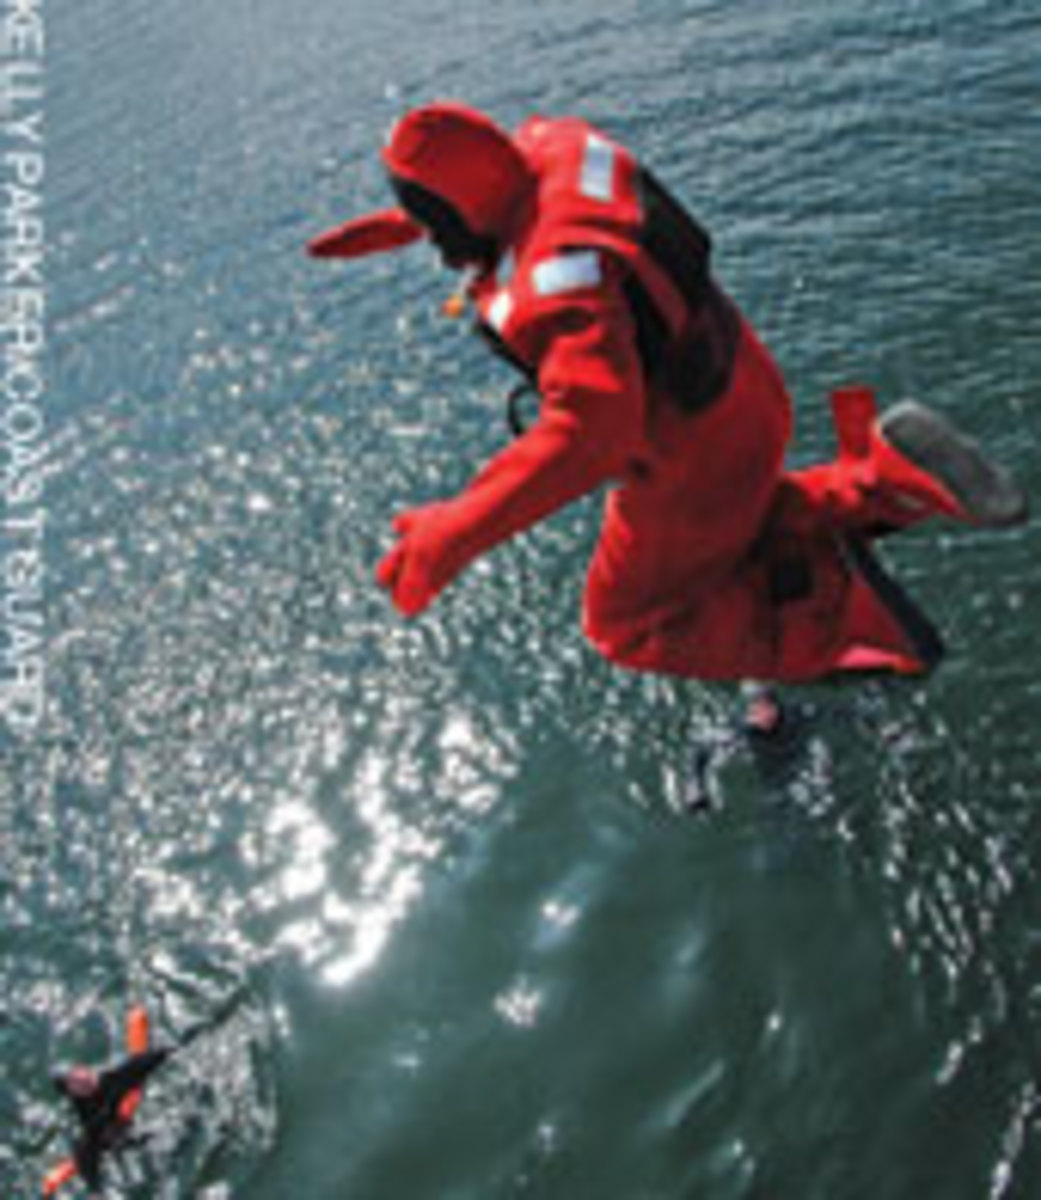 A survival suit can mean the difference between life and death in cold-water rescues.